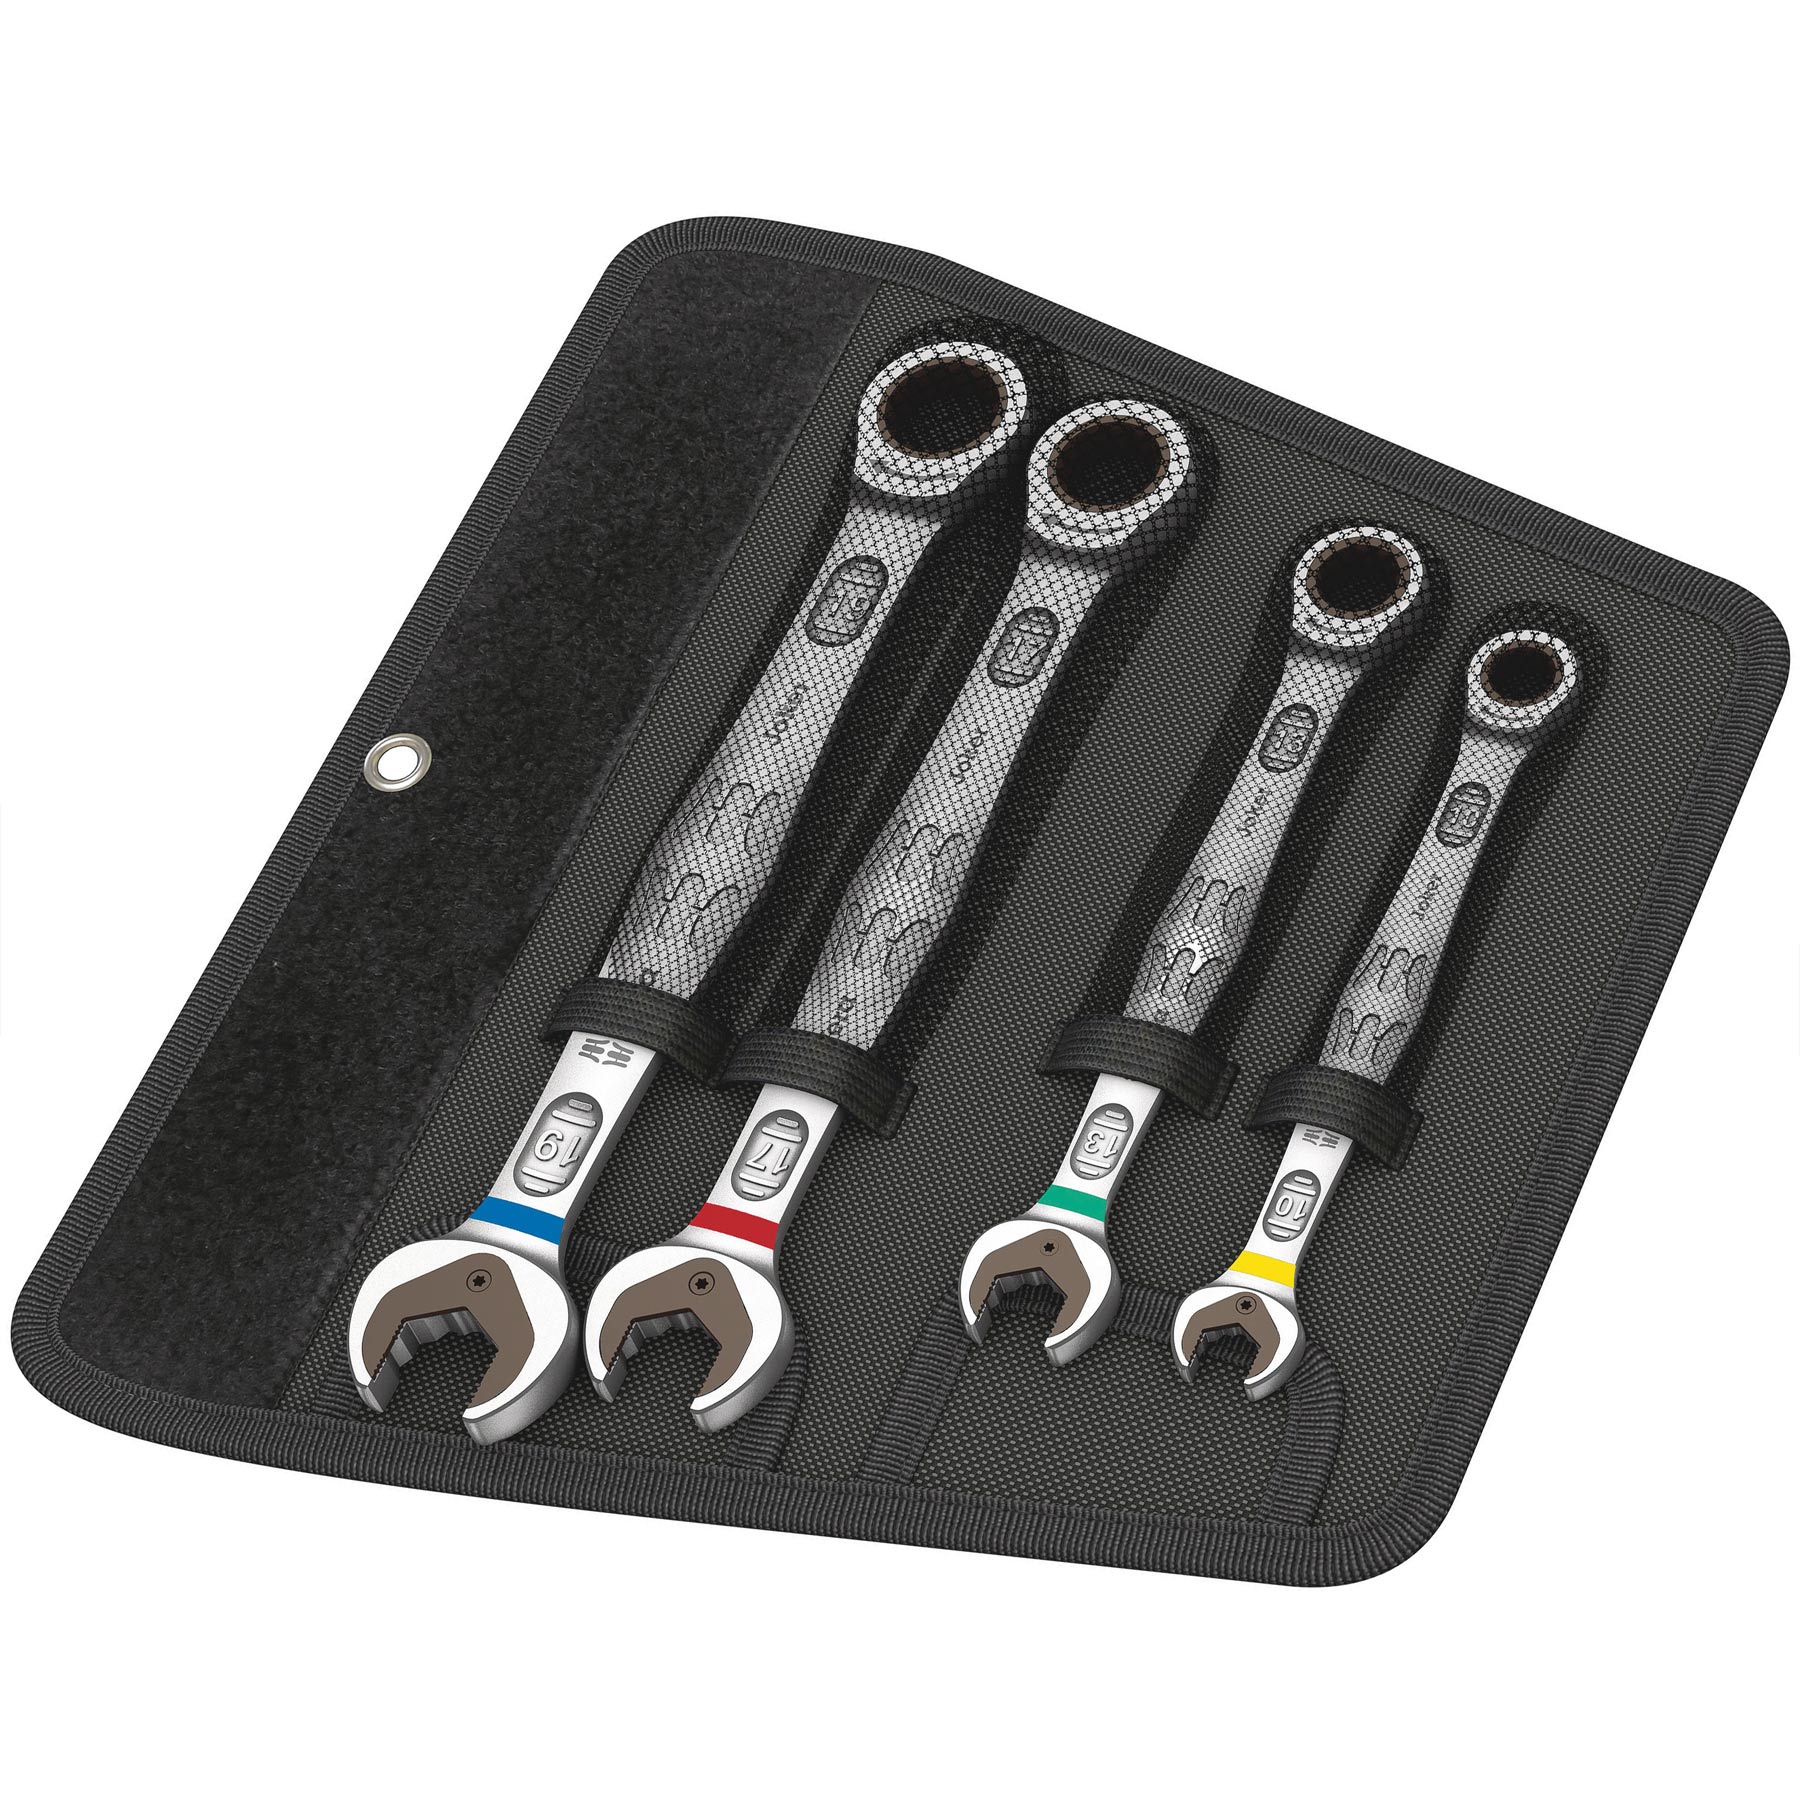 Picture of Wera Joker 4 Set 1 - Set of Ratcheting Combination Wrenches - 4 Pcs.